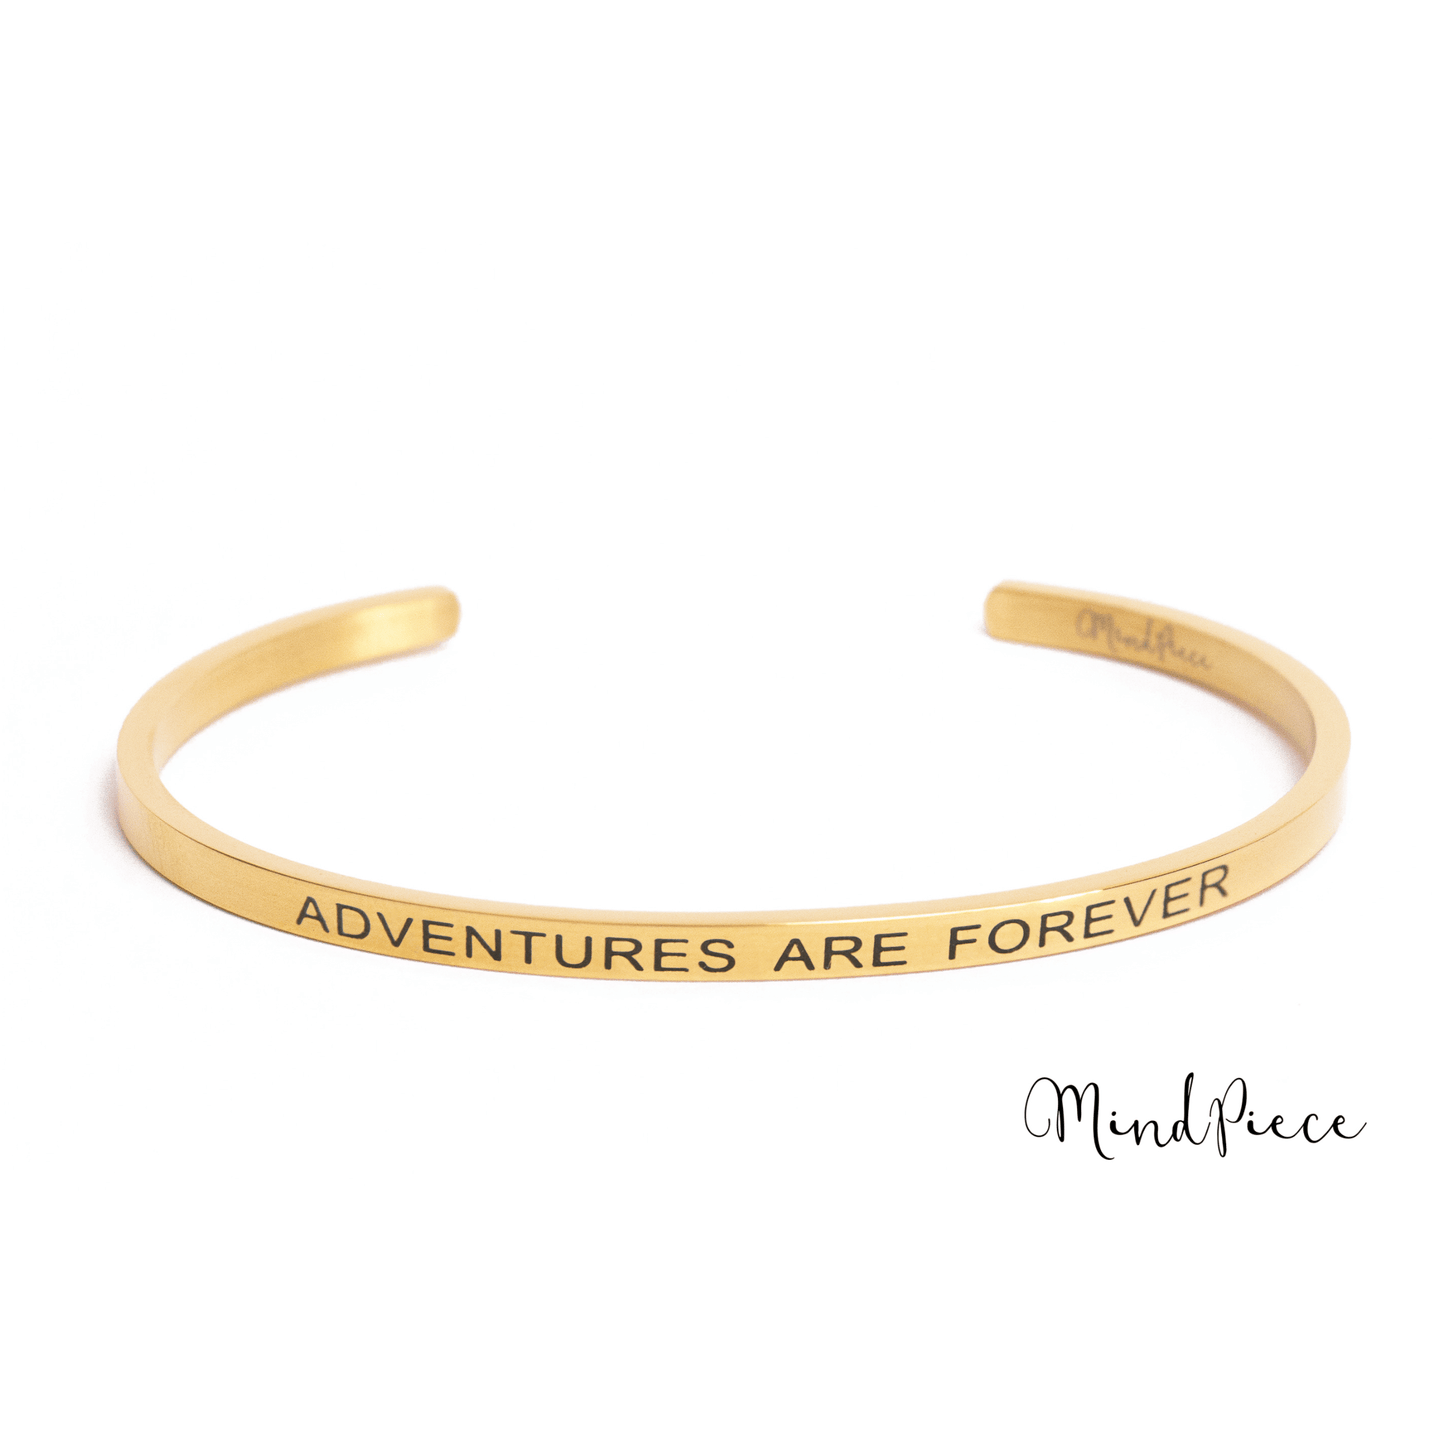 Bracelet quote | adventures are forever (1 pcs) - gold, silver & rose